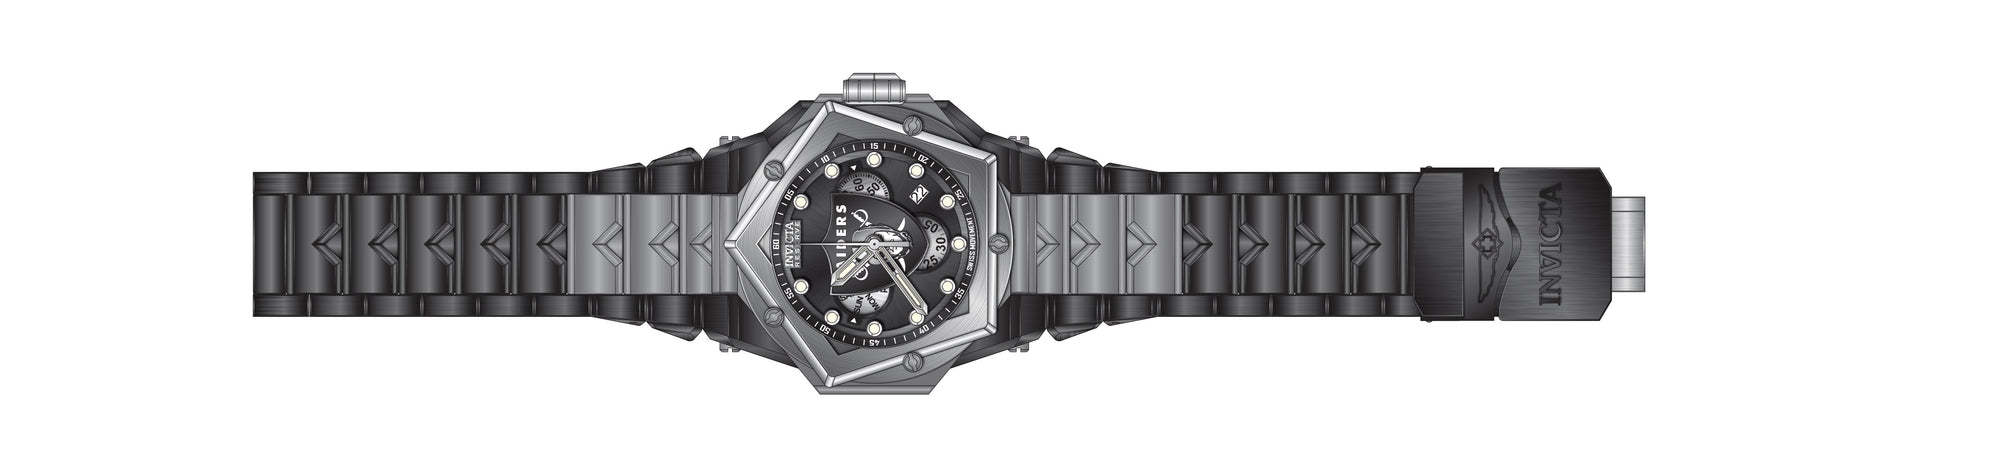 Band For Invicta NFL 44492